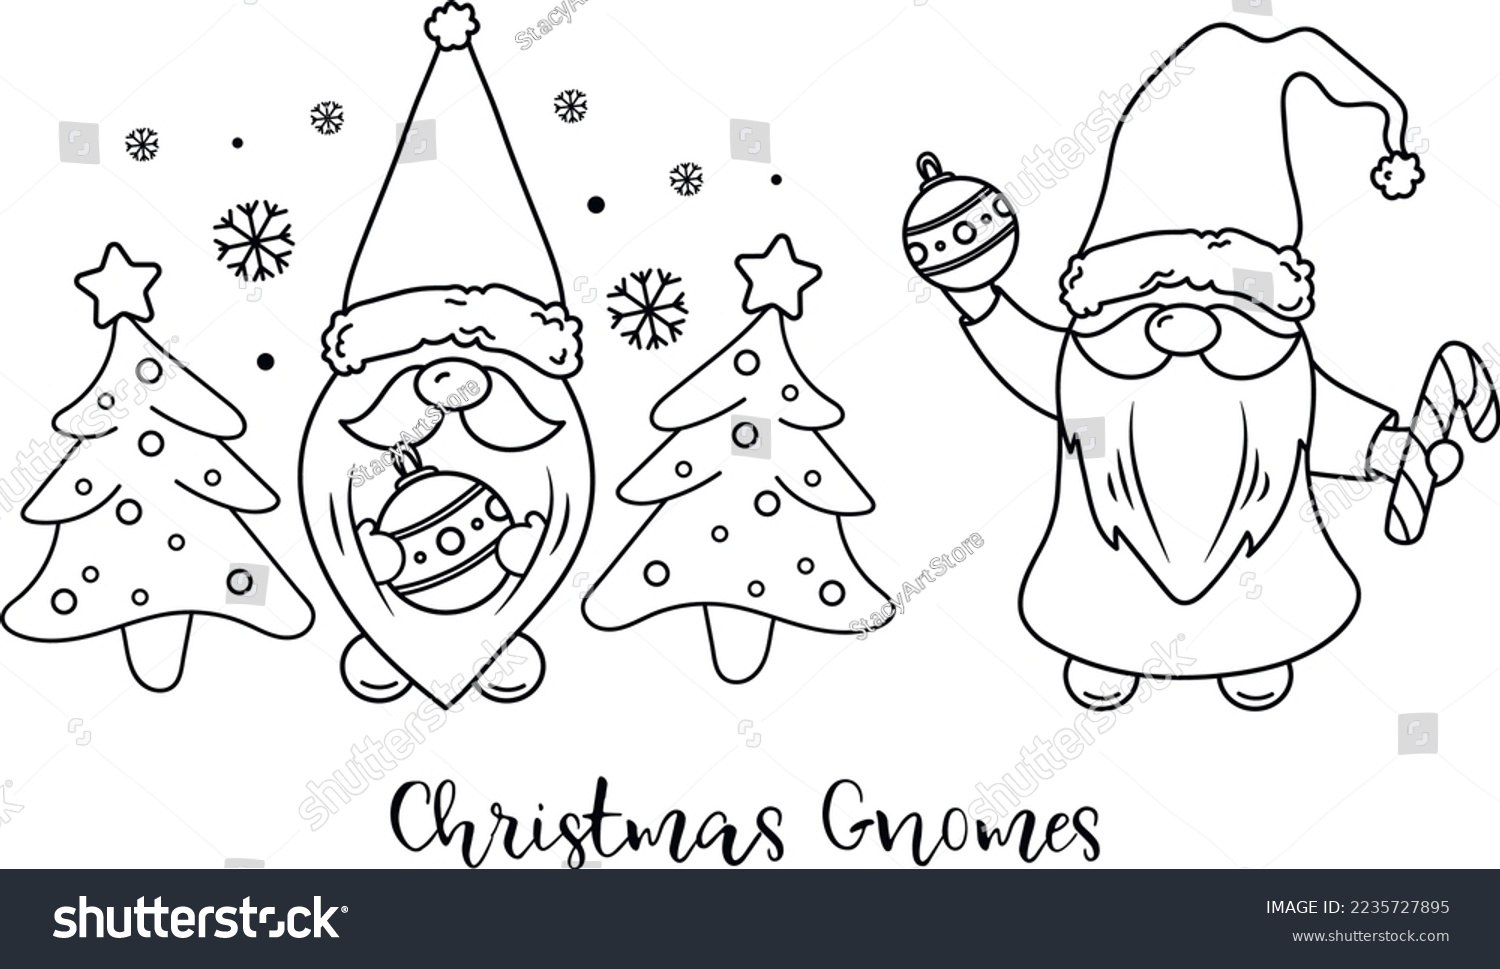 SVG of Hand Drawn Vector Christmas Gnome SVG Illustration Set Isolated on White. Happy New Year Composition Perfect for Cut Designs, Cutting Boards, T-shirt, Printing, Greetings and other Craft Designs svg